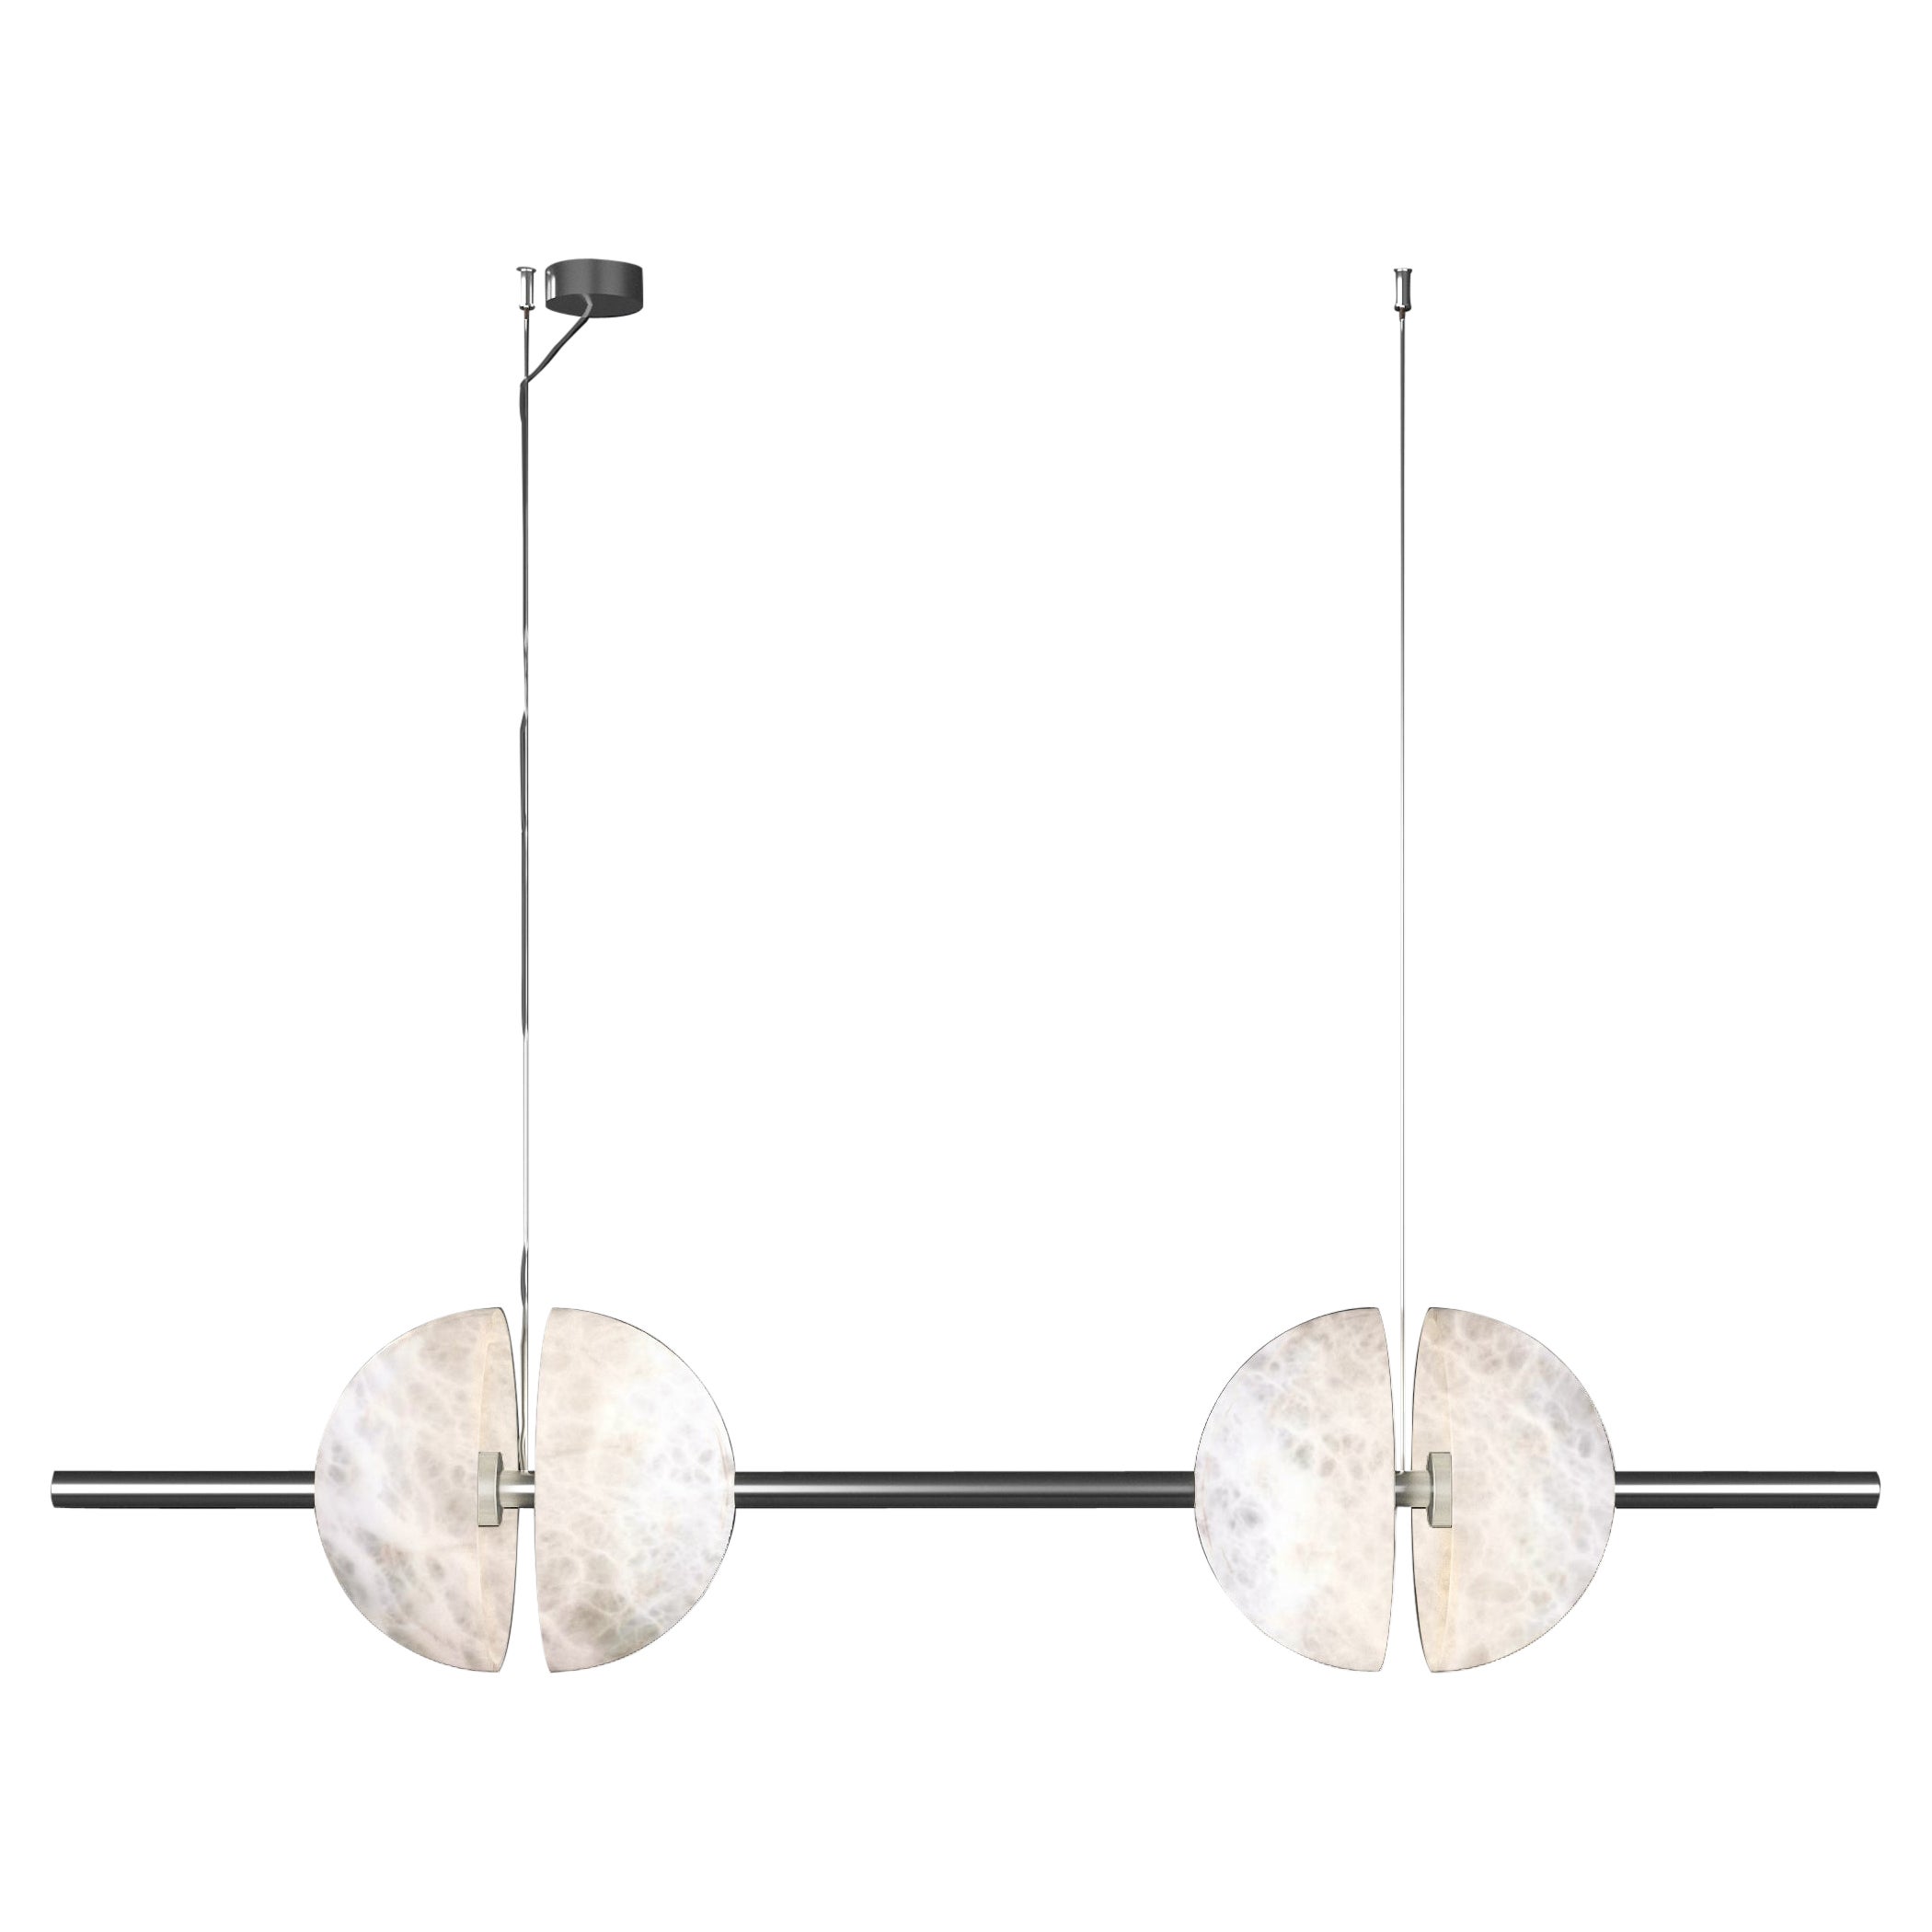 Ermes Metal Shiny Silver and Alabaster Suspension Light 1 by Alabastro Italiano